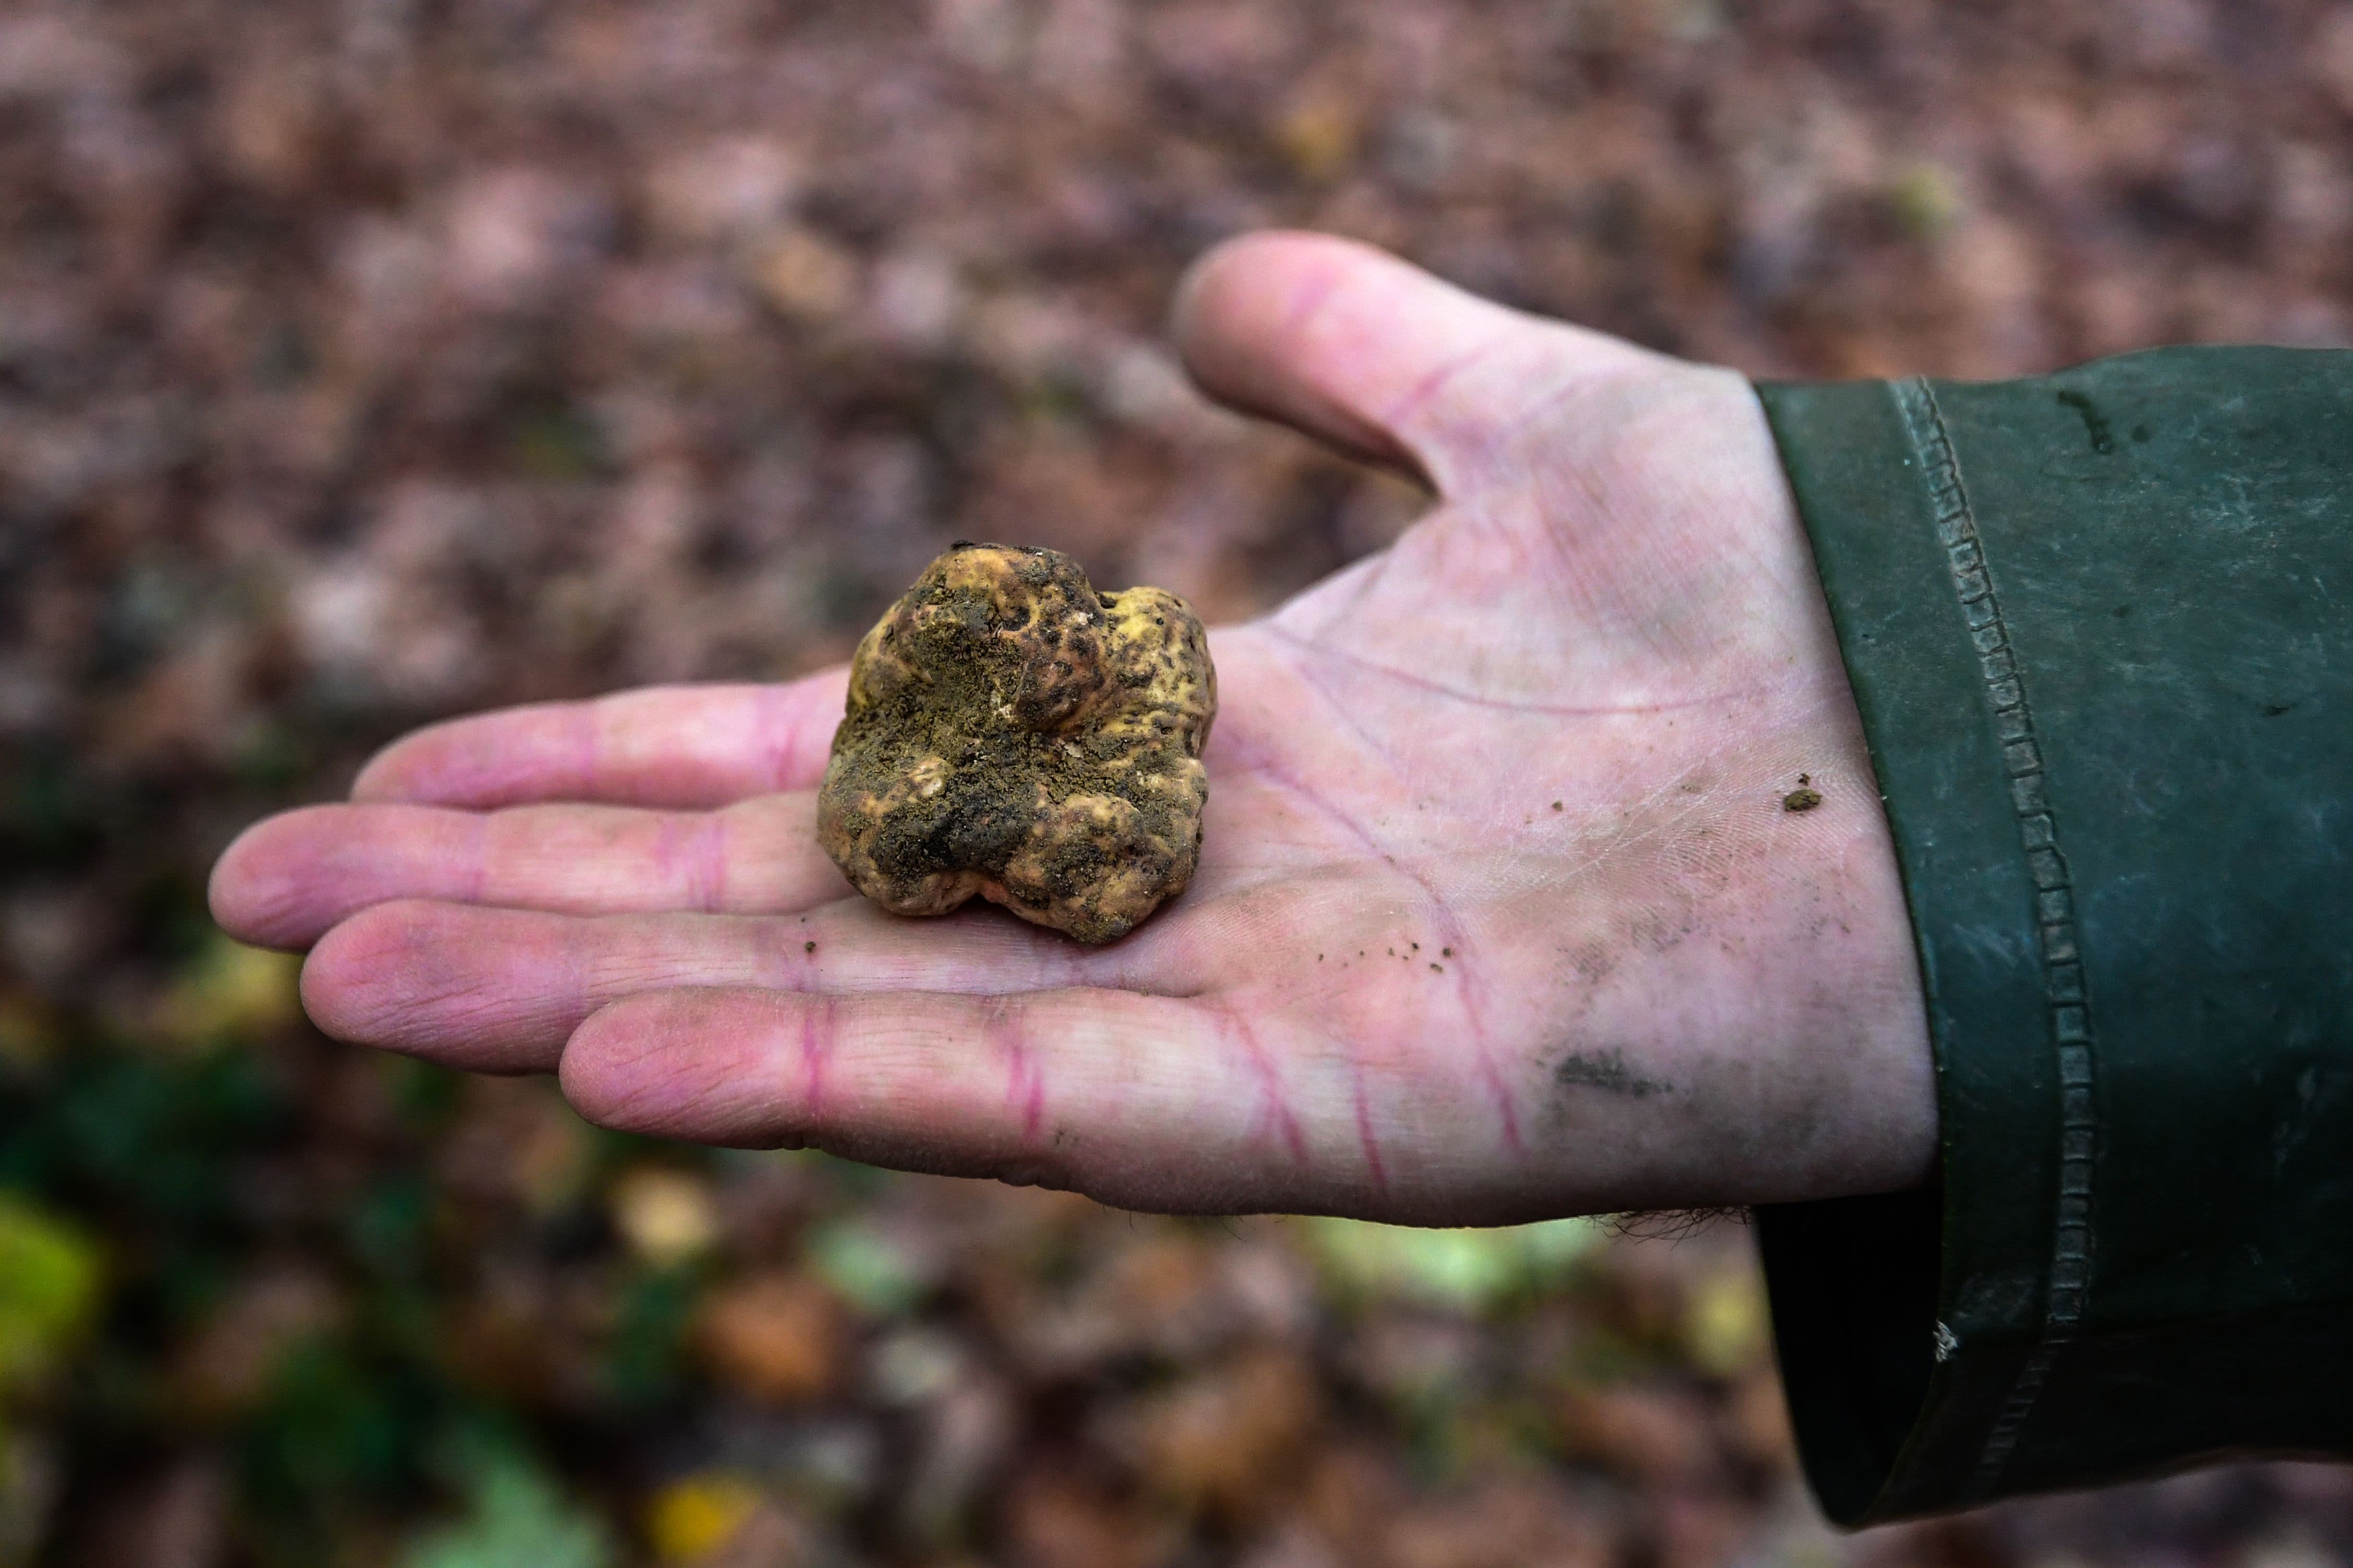 Italy's white truffle hunters worry about climate change - CNBC